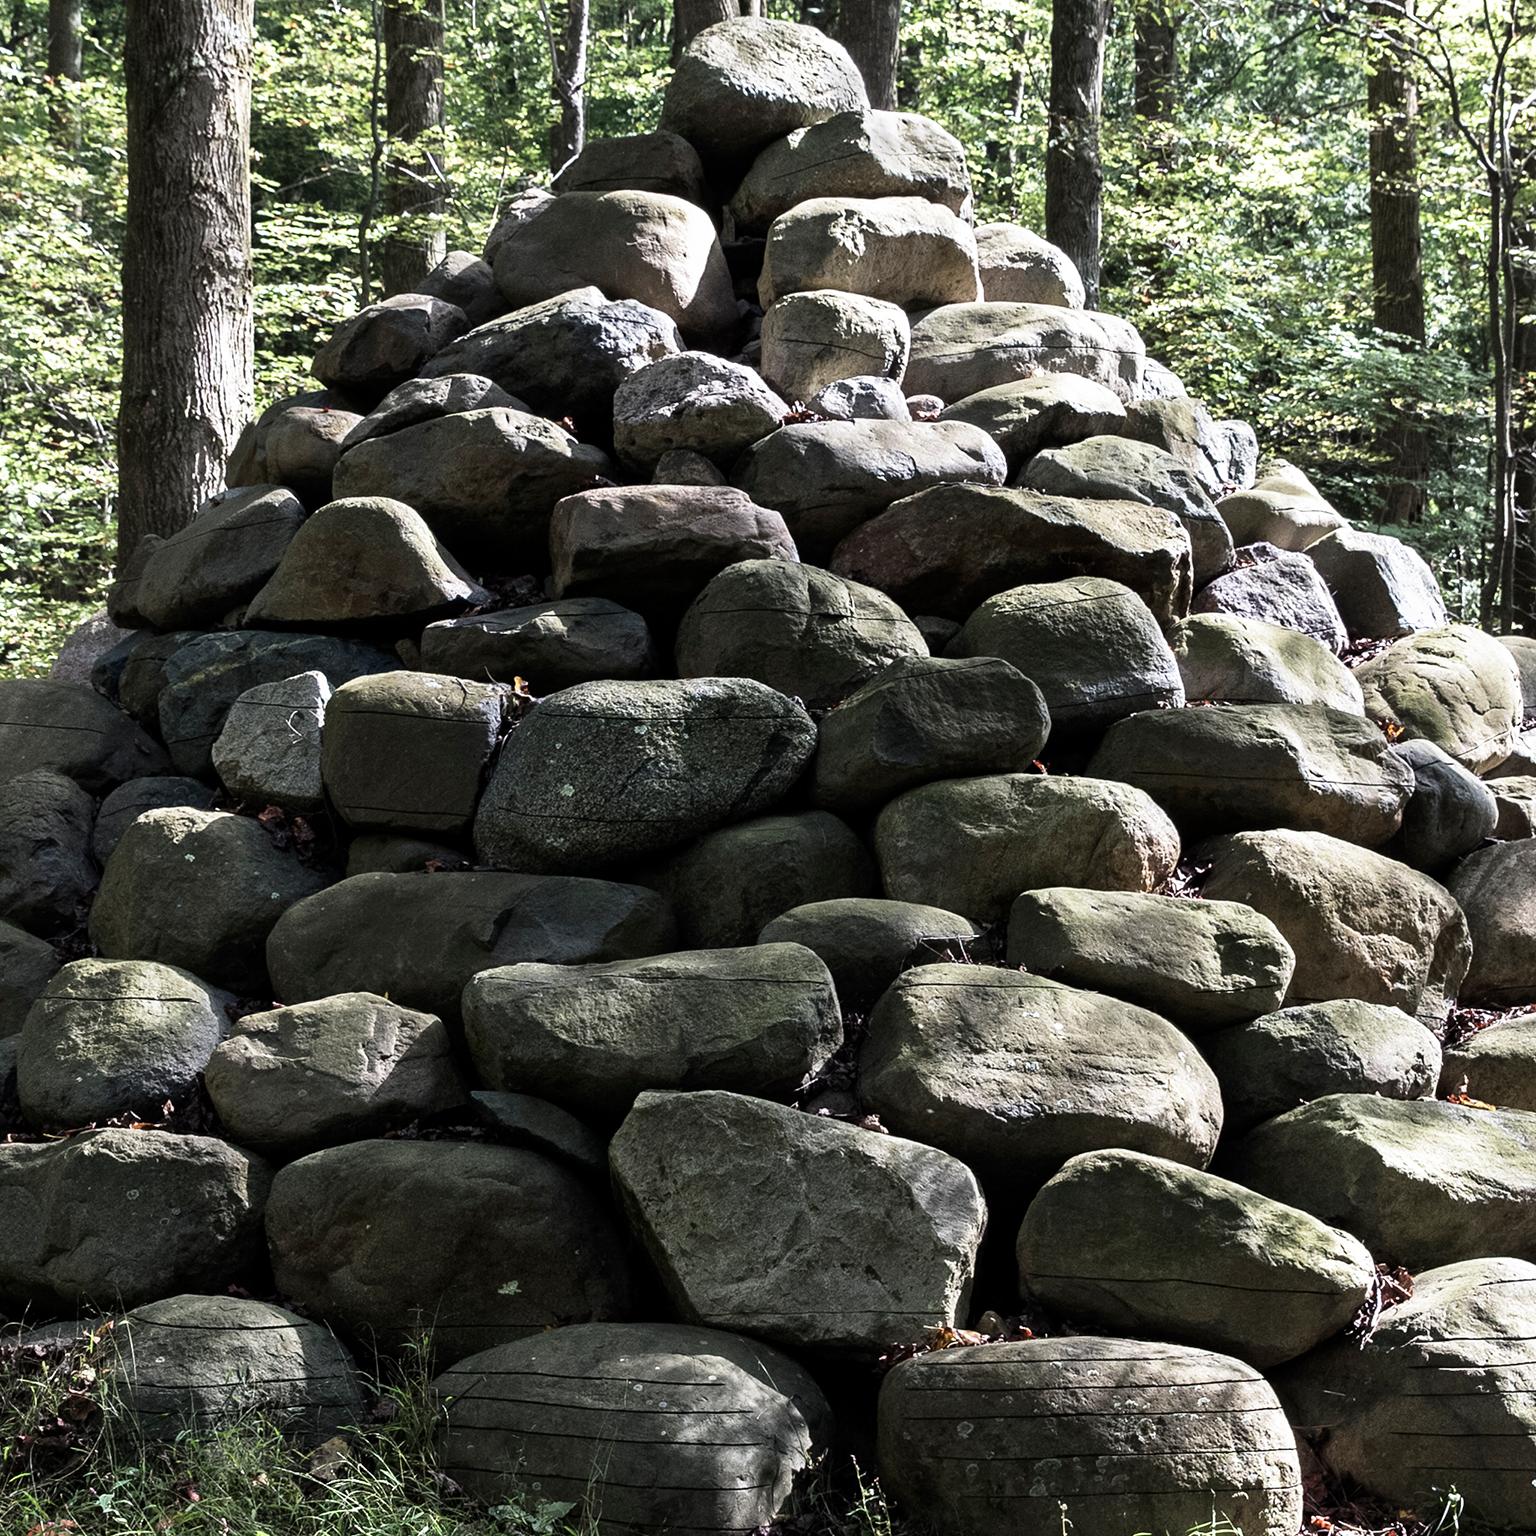 Stone Cairn Sculpture in Forest,  USA, 2016 - Photograph by  Cosmo Condina